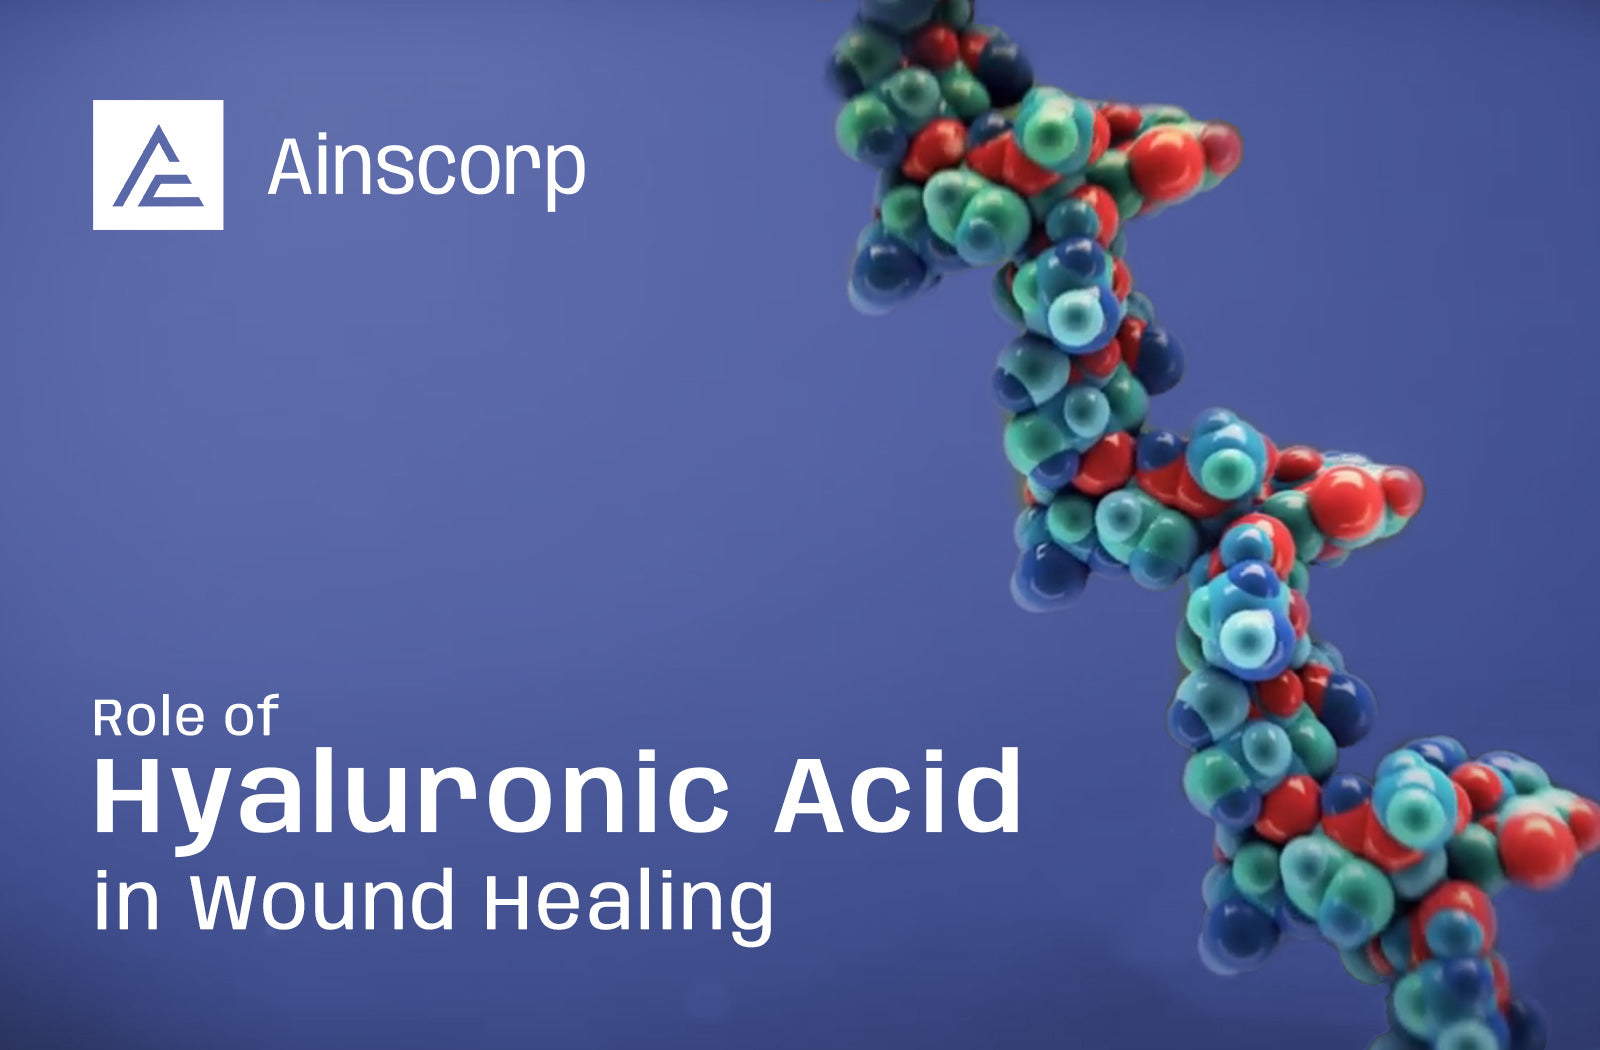 Load video: The video describes the role of Hyaluronic acid in wound healing